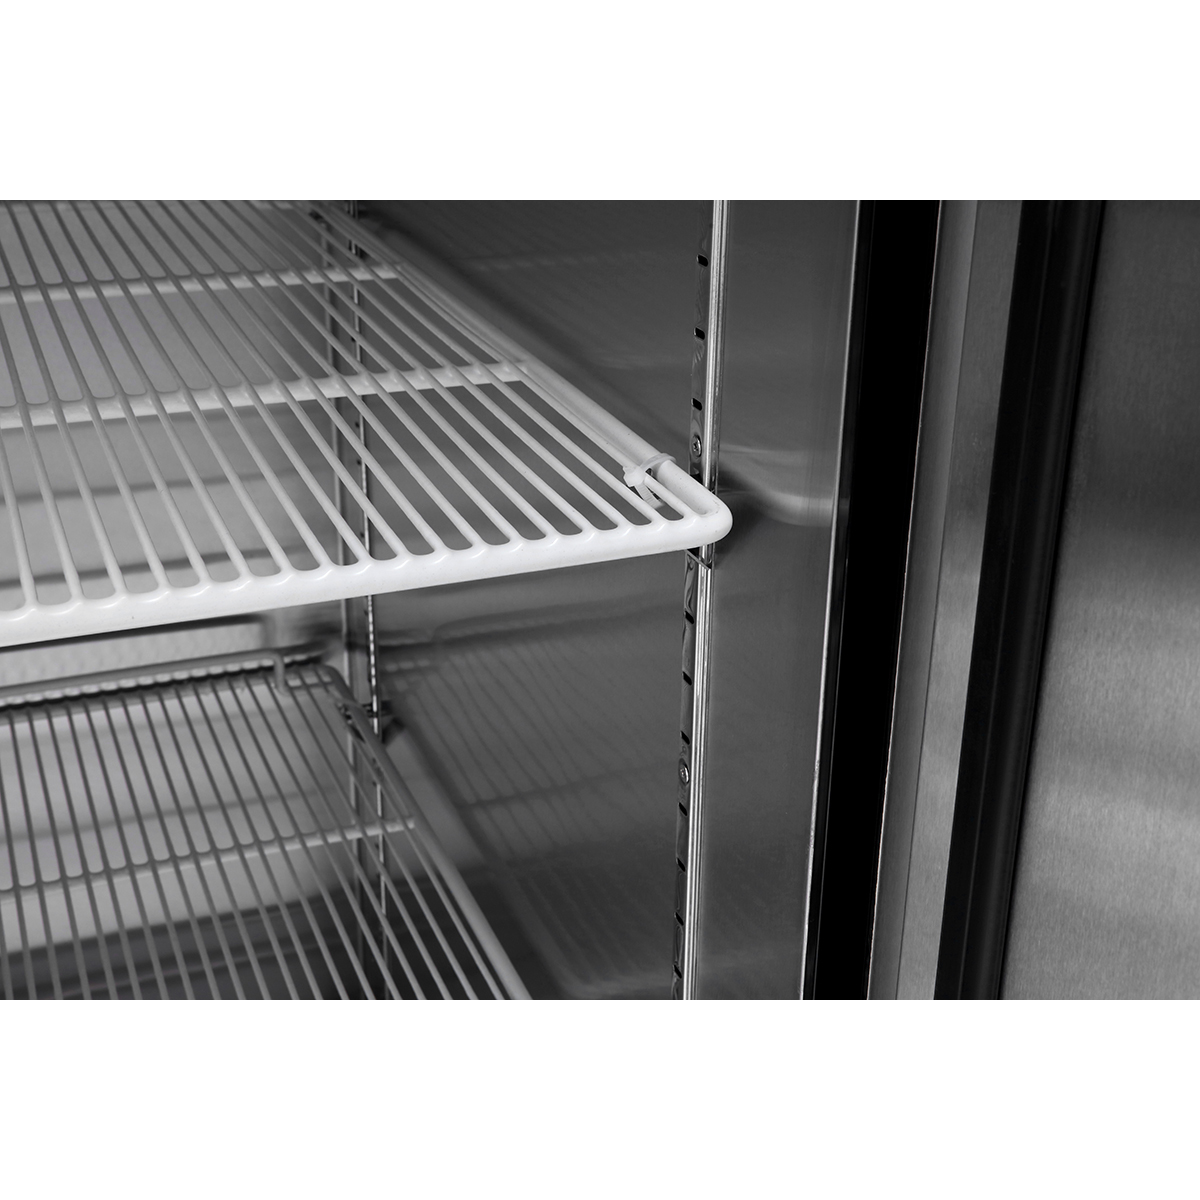 Atosa MBF8507GR 2 Section Reach-In Bottom Mount Refrigerator 54-3/8"W x 31-1/2"D x 83-1/8"H with 2 Locking Solid Doors image 5